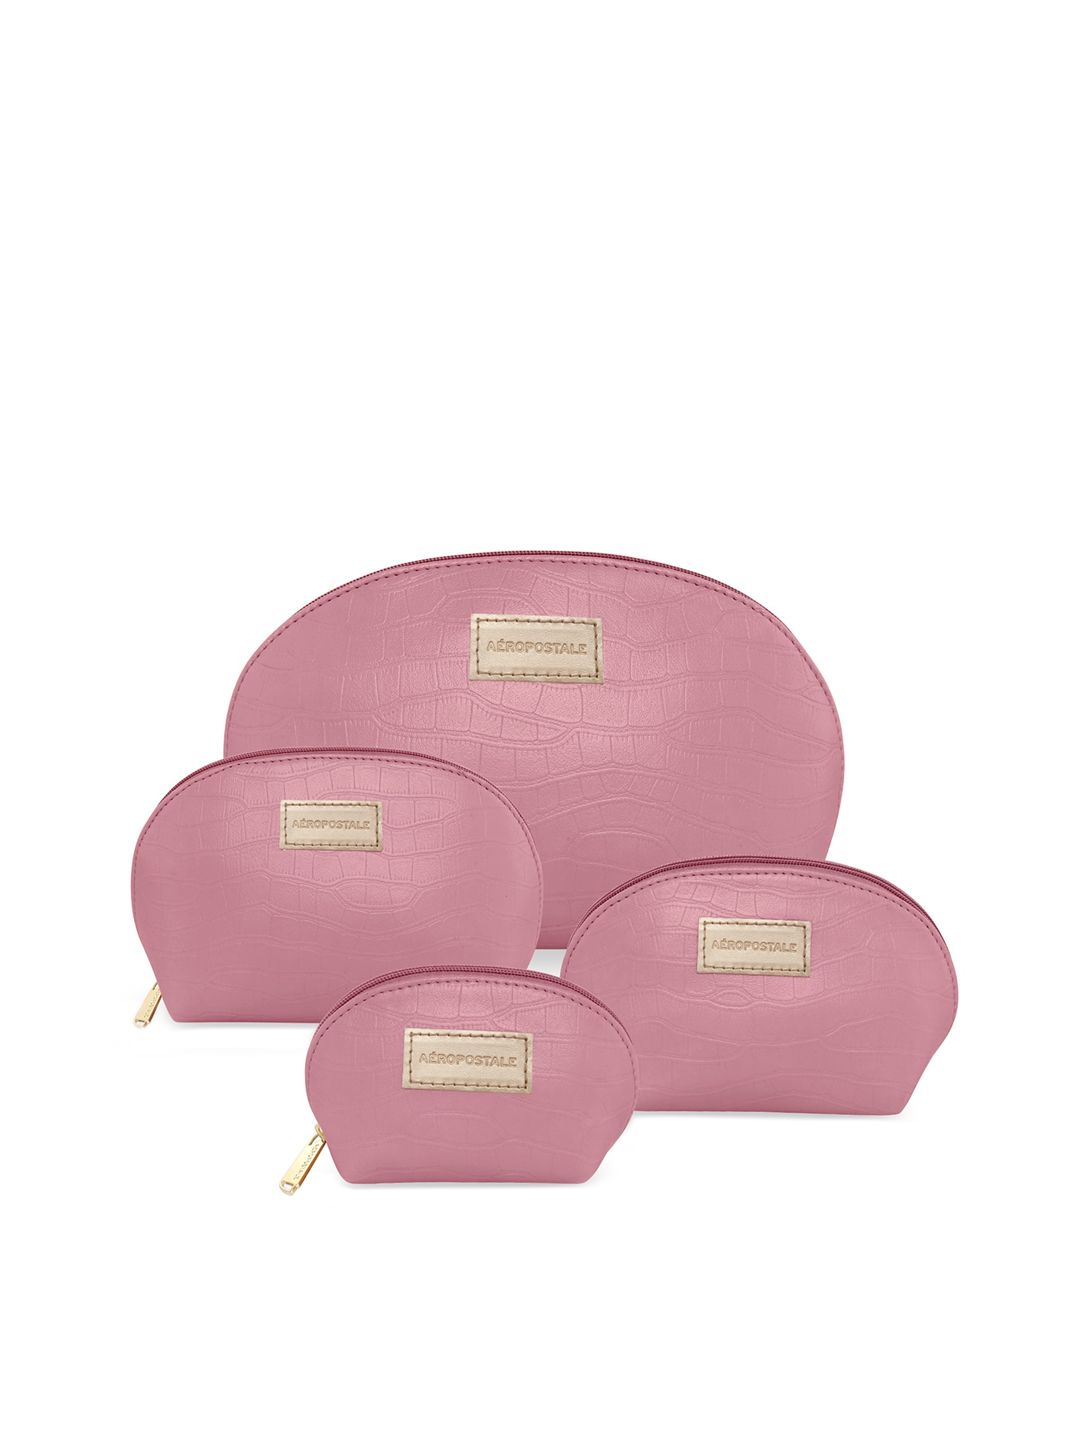 Aeropostale Pink PU Structured Sling Bag with Bow Detail Price in India